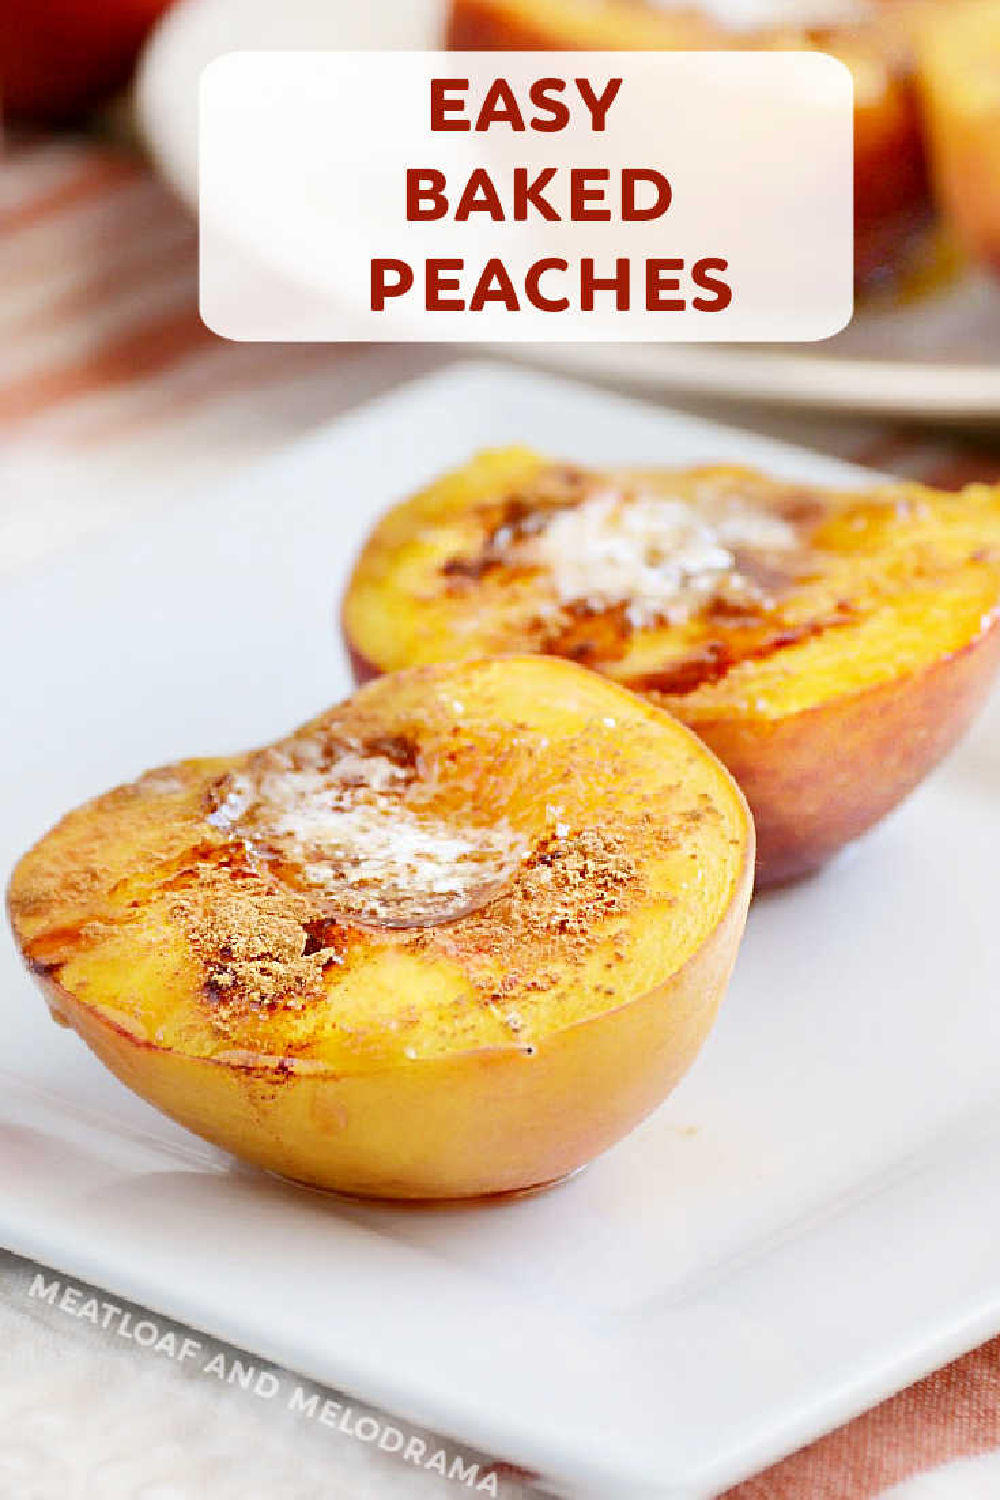 Easy Baked Peaches recipe with brown sugar and cinnamon is an easy dessert made with simple ingredients. This delicious summer dessert is perfect for peach season! via @meamel